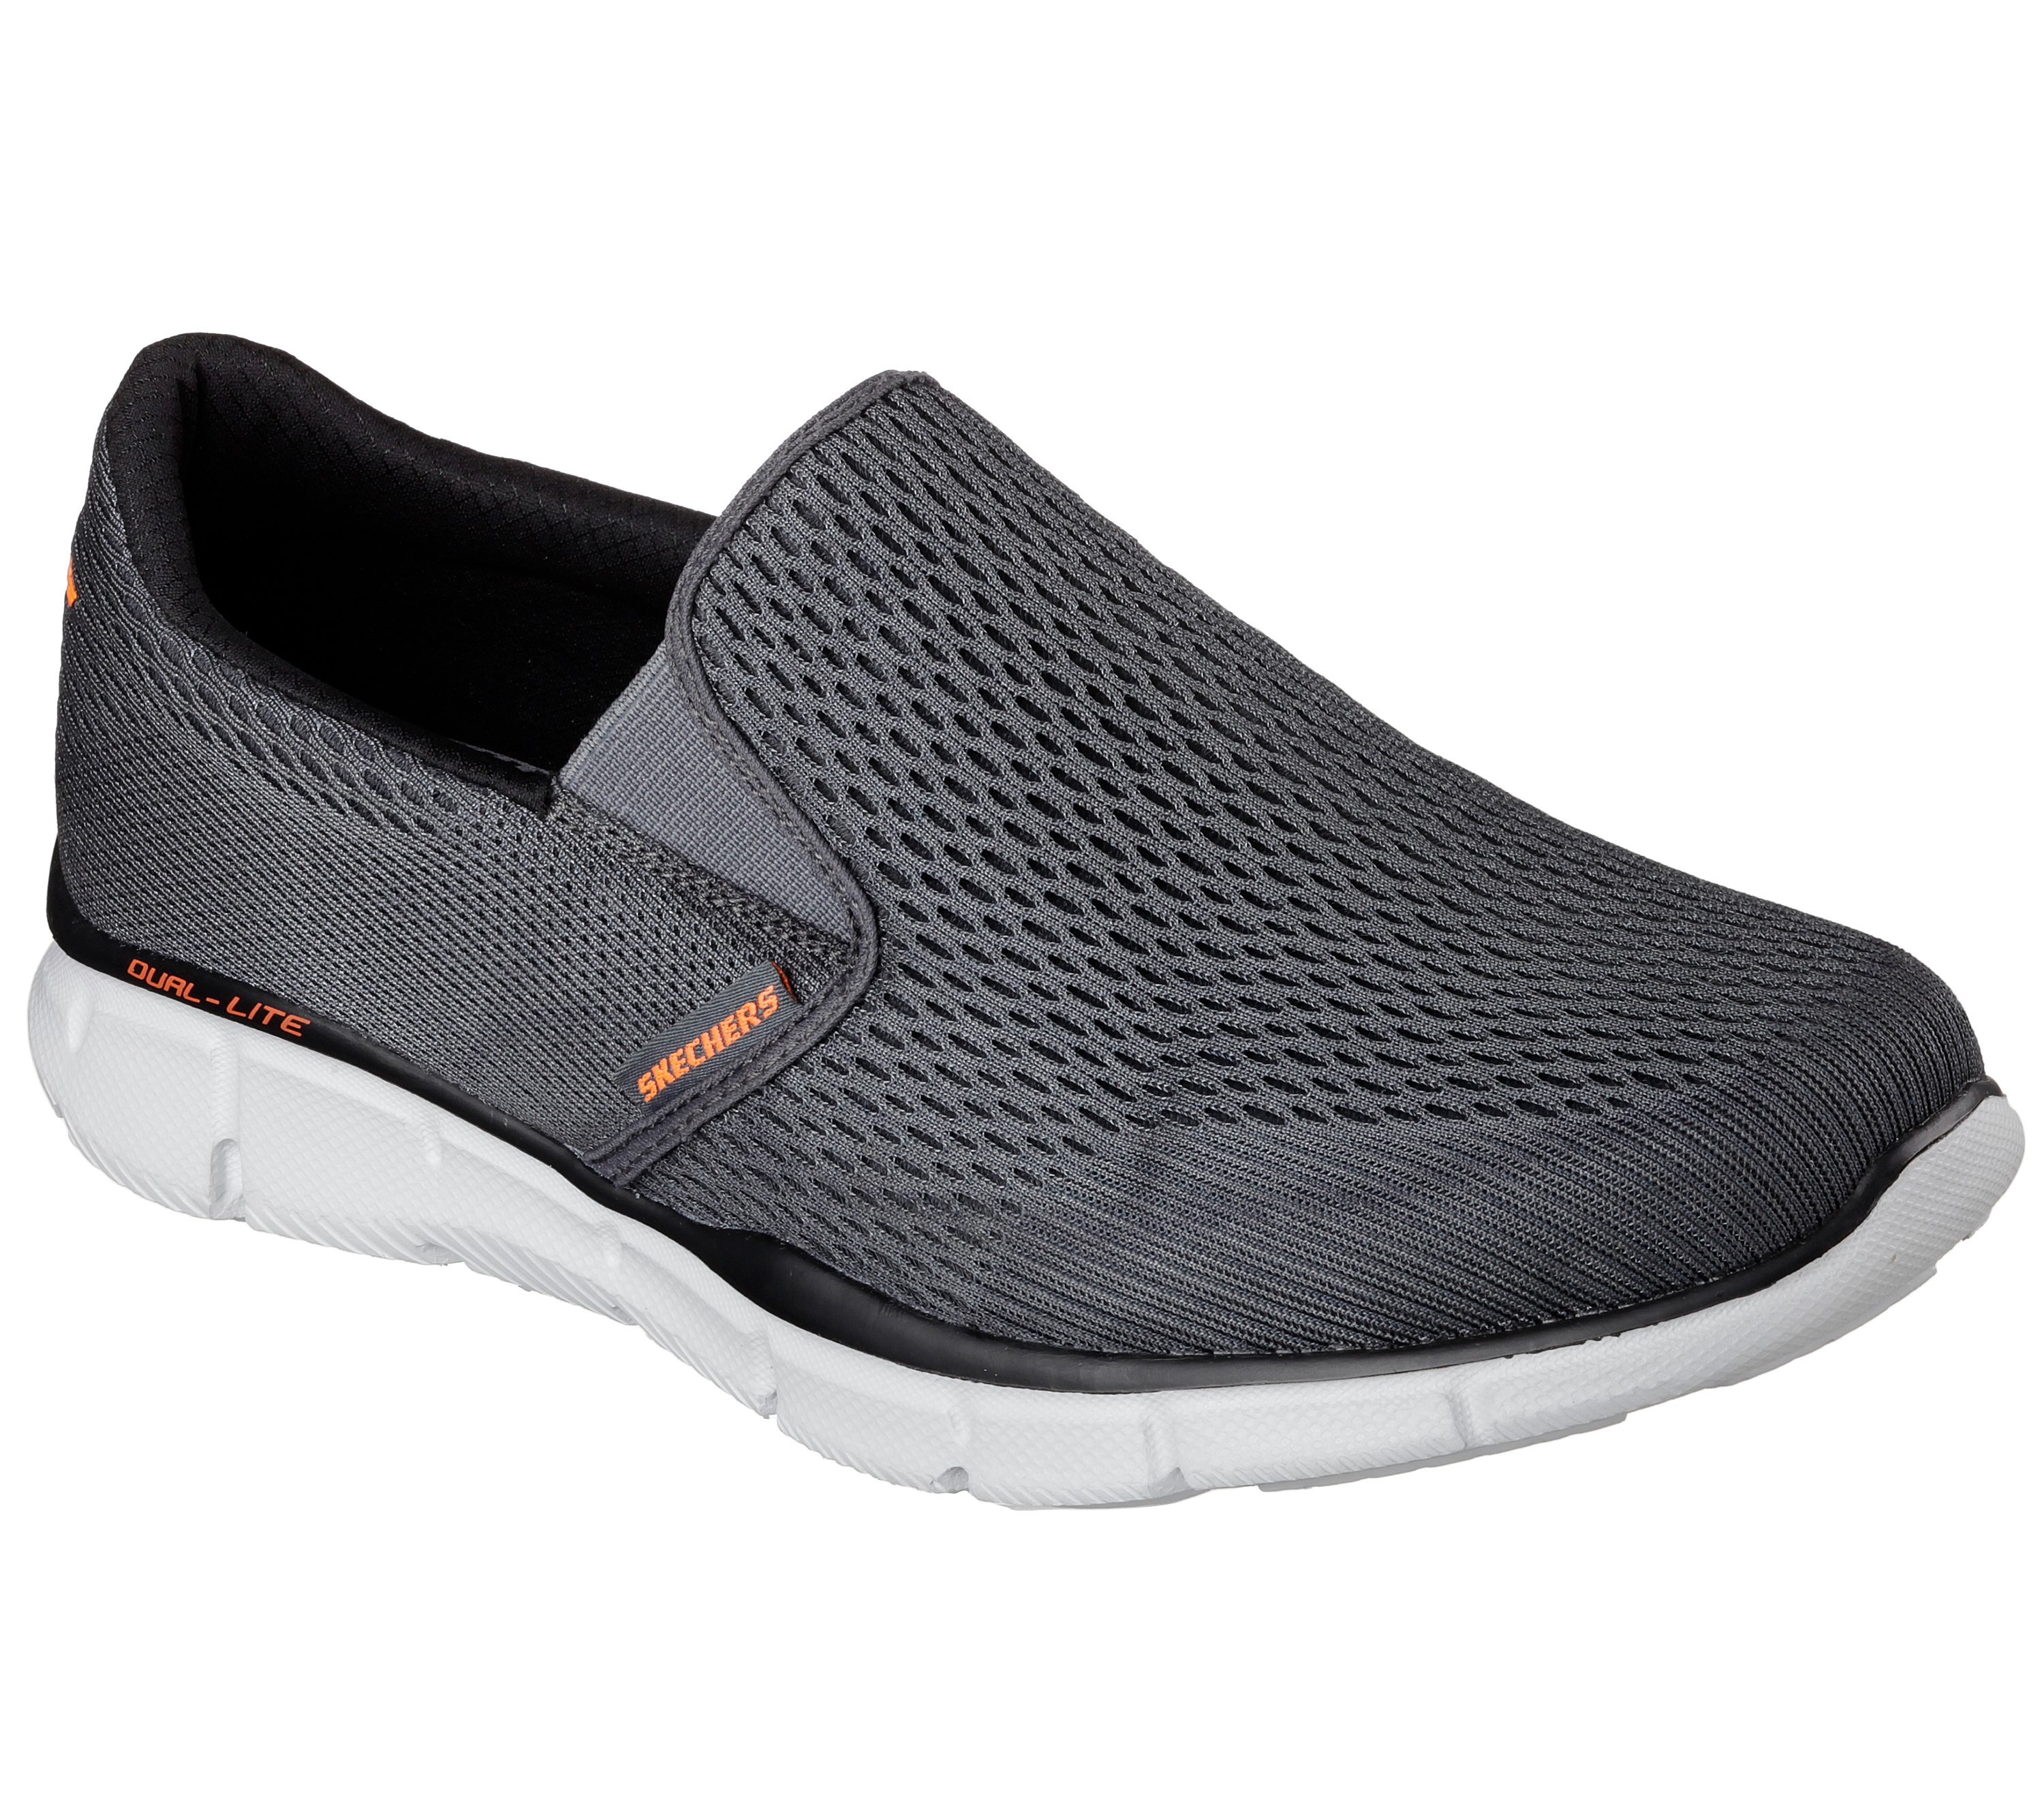 Shop the Equalizer - Double Play | SKECHERS